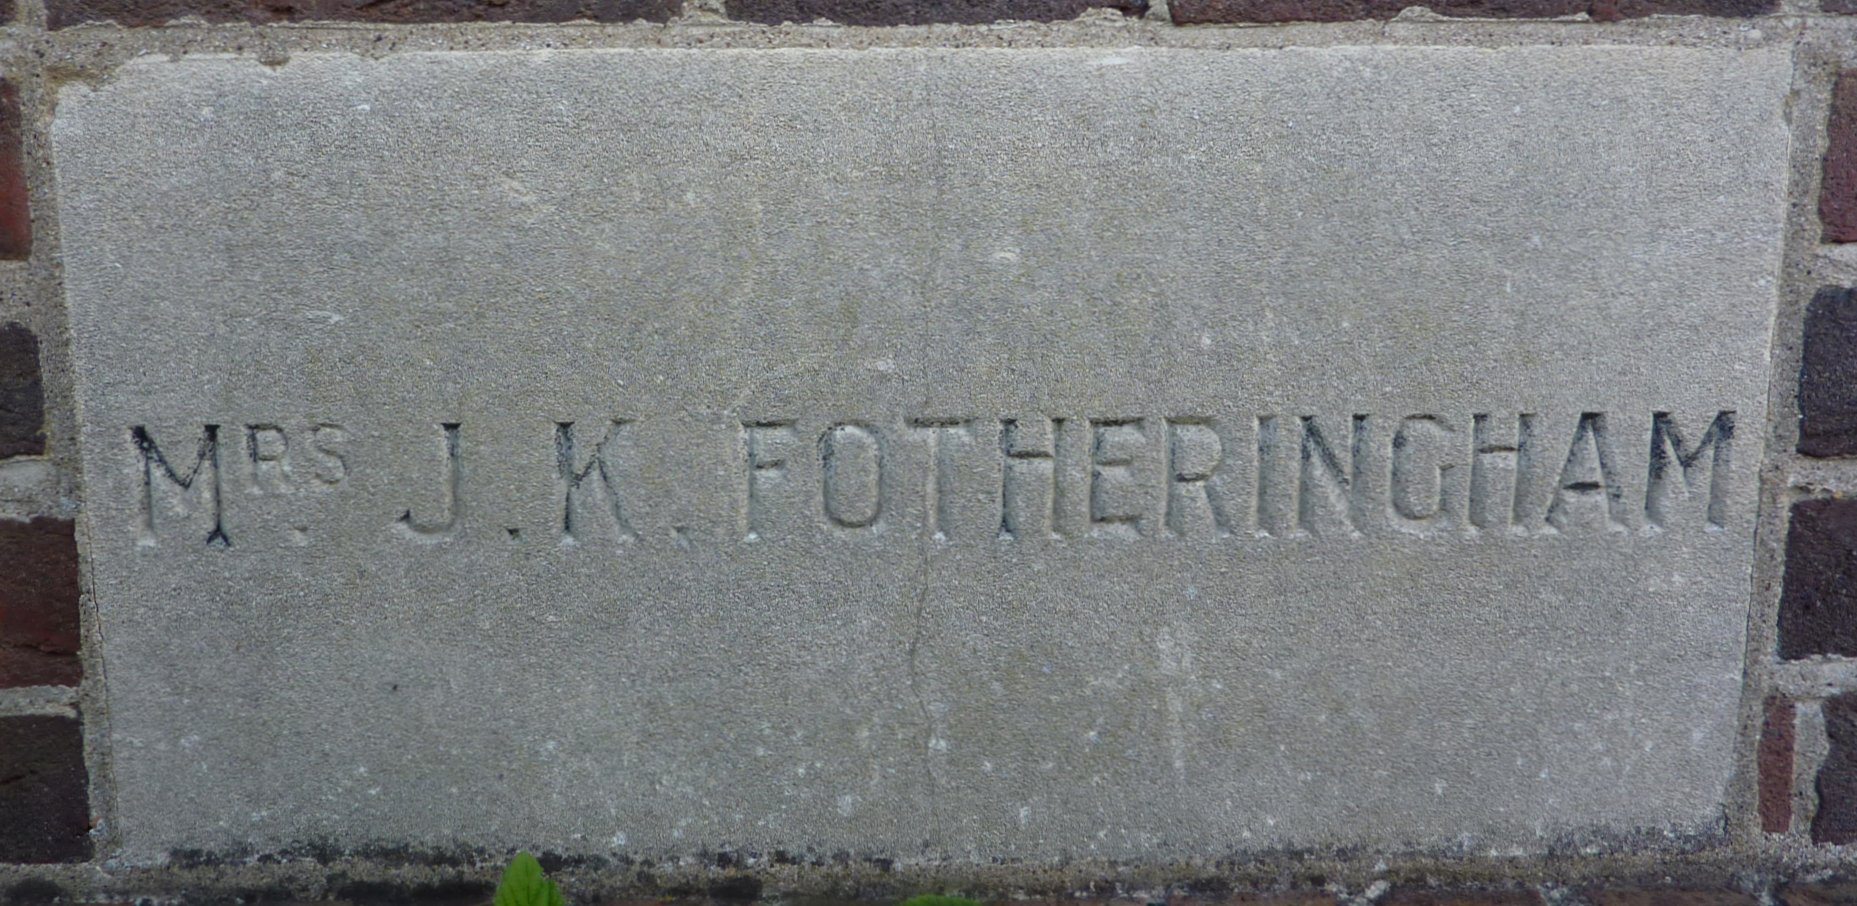 South Oxford Baptist Church 1938 Fotheringham stone smaller